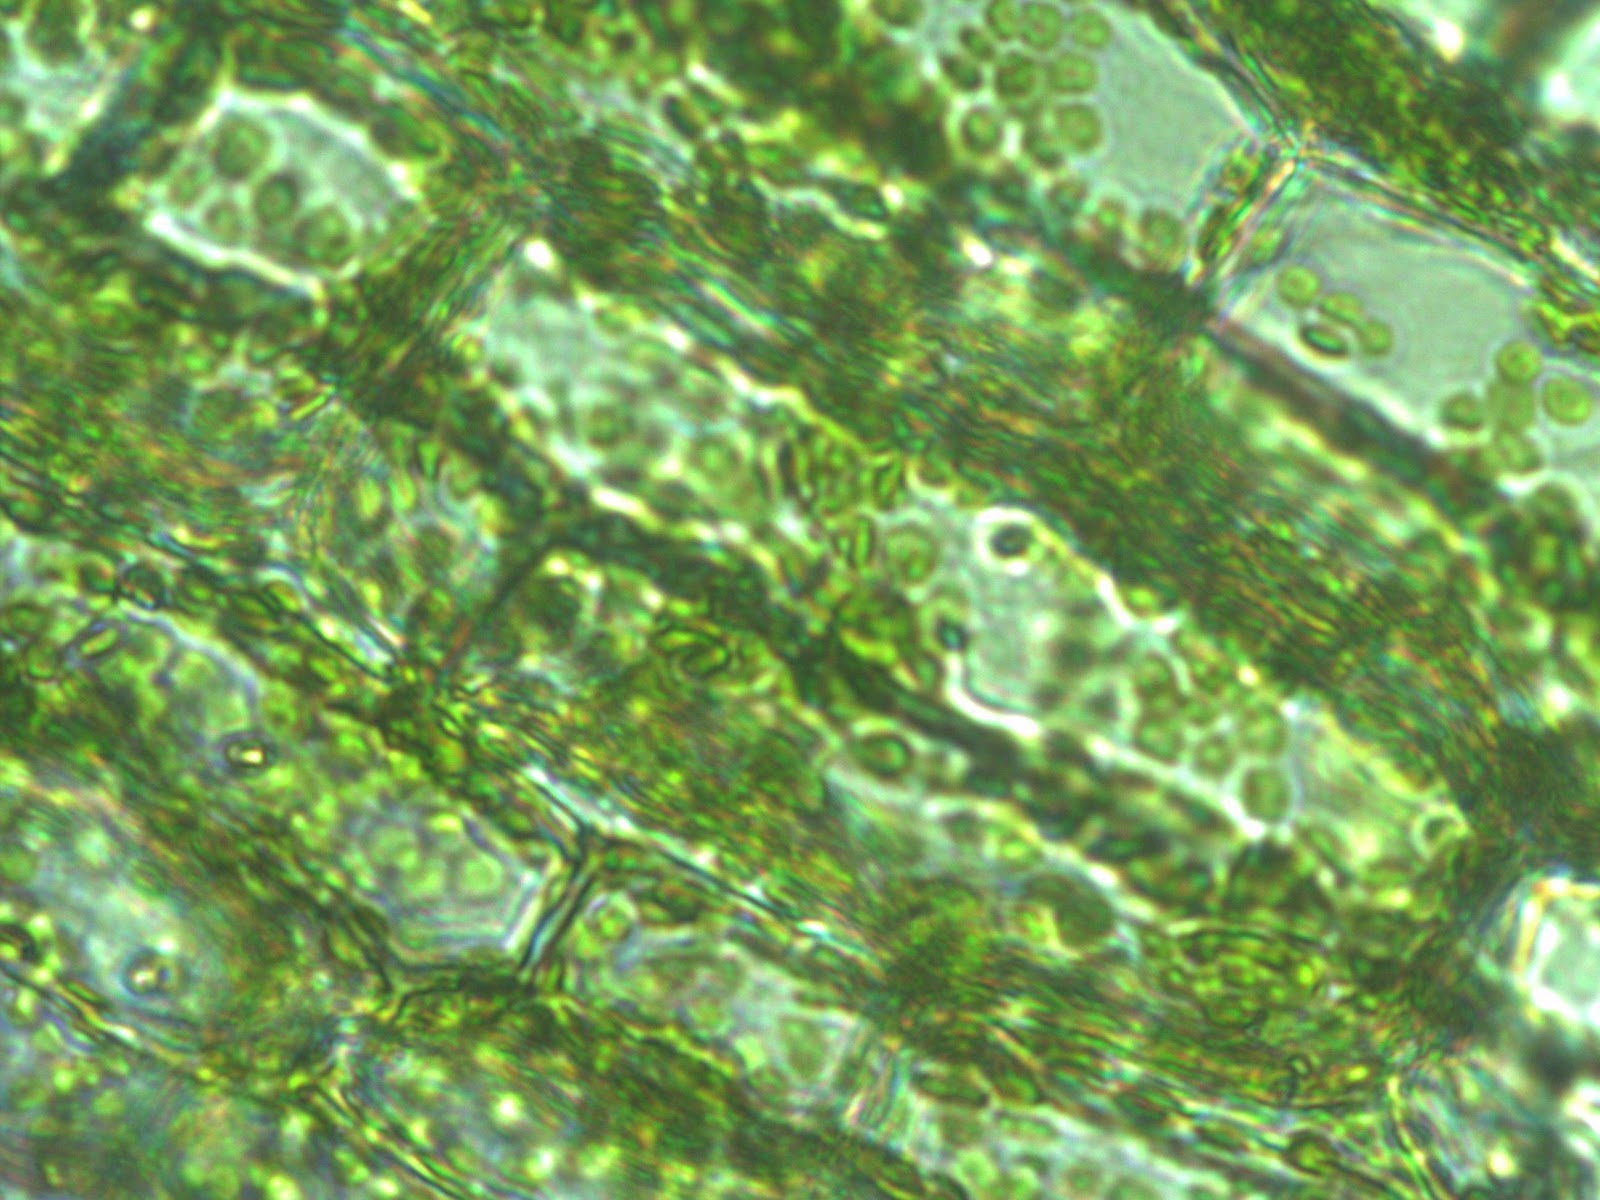 This image is of Elodea cells as viewed at 400x magnification